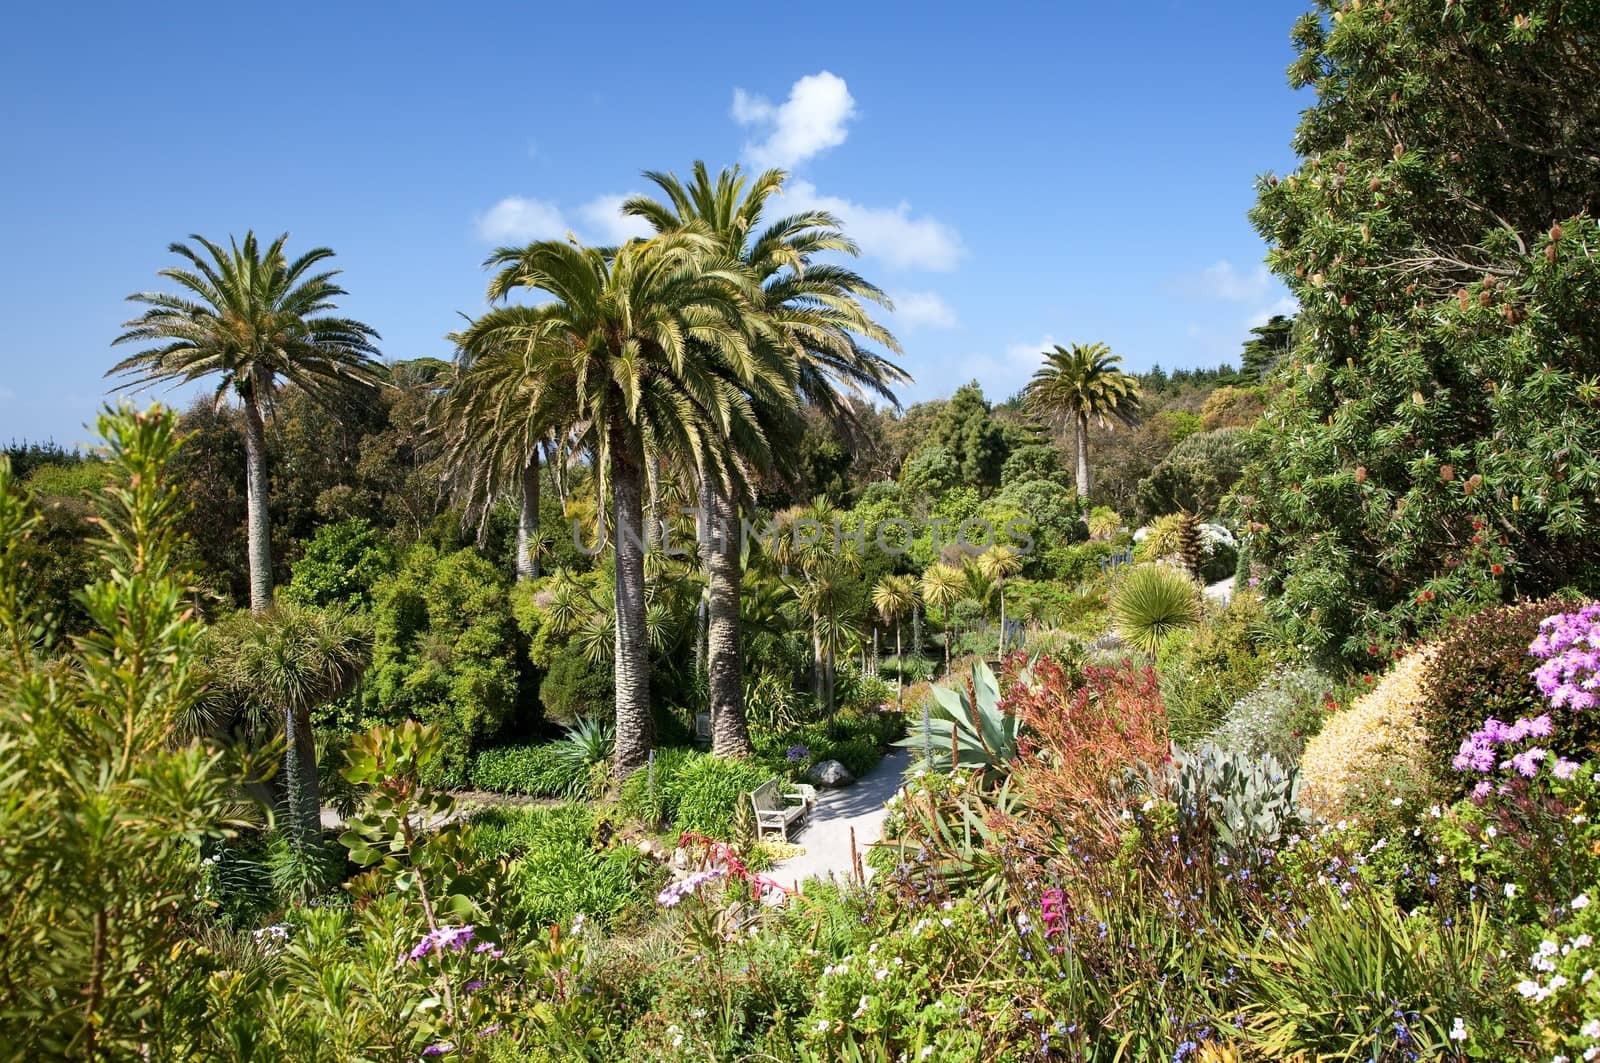 The tropical gardens on Tresco, Isles of Scilly, Cornwall, England.